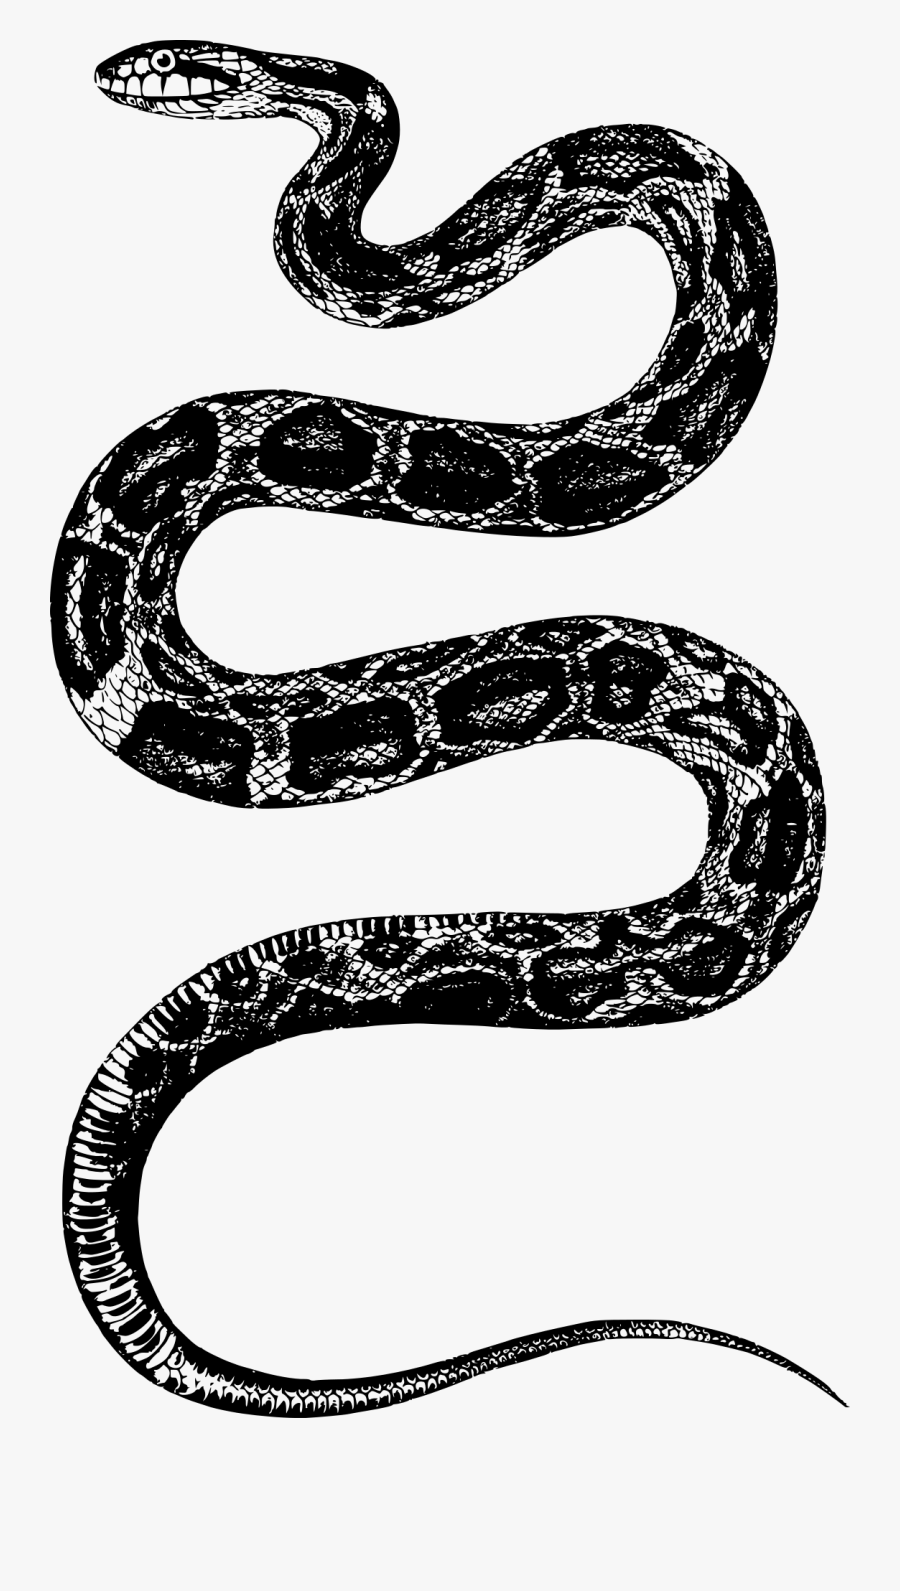 Thumb Image - Snake Clipart Black And White Png, Transparent Clipart